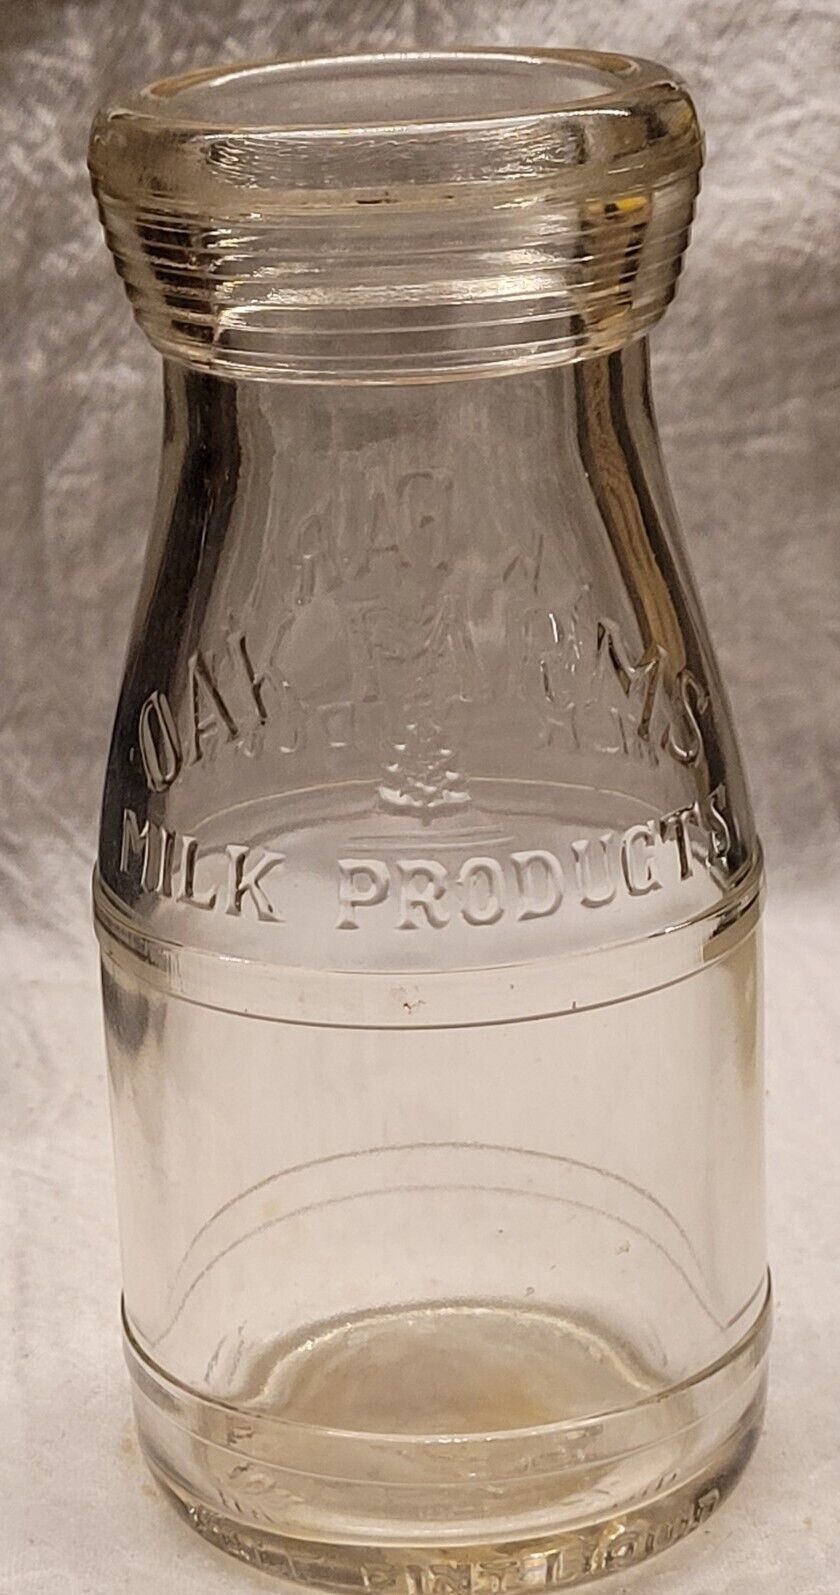 OAK FARMS DAIRY PRODUCTS DALLAS TEXAS  HALF PINT UNUSUAL PATENT APPLIED FOR TOP 